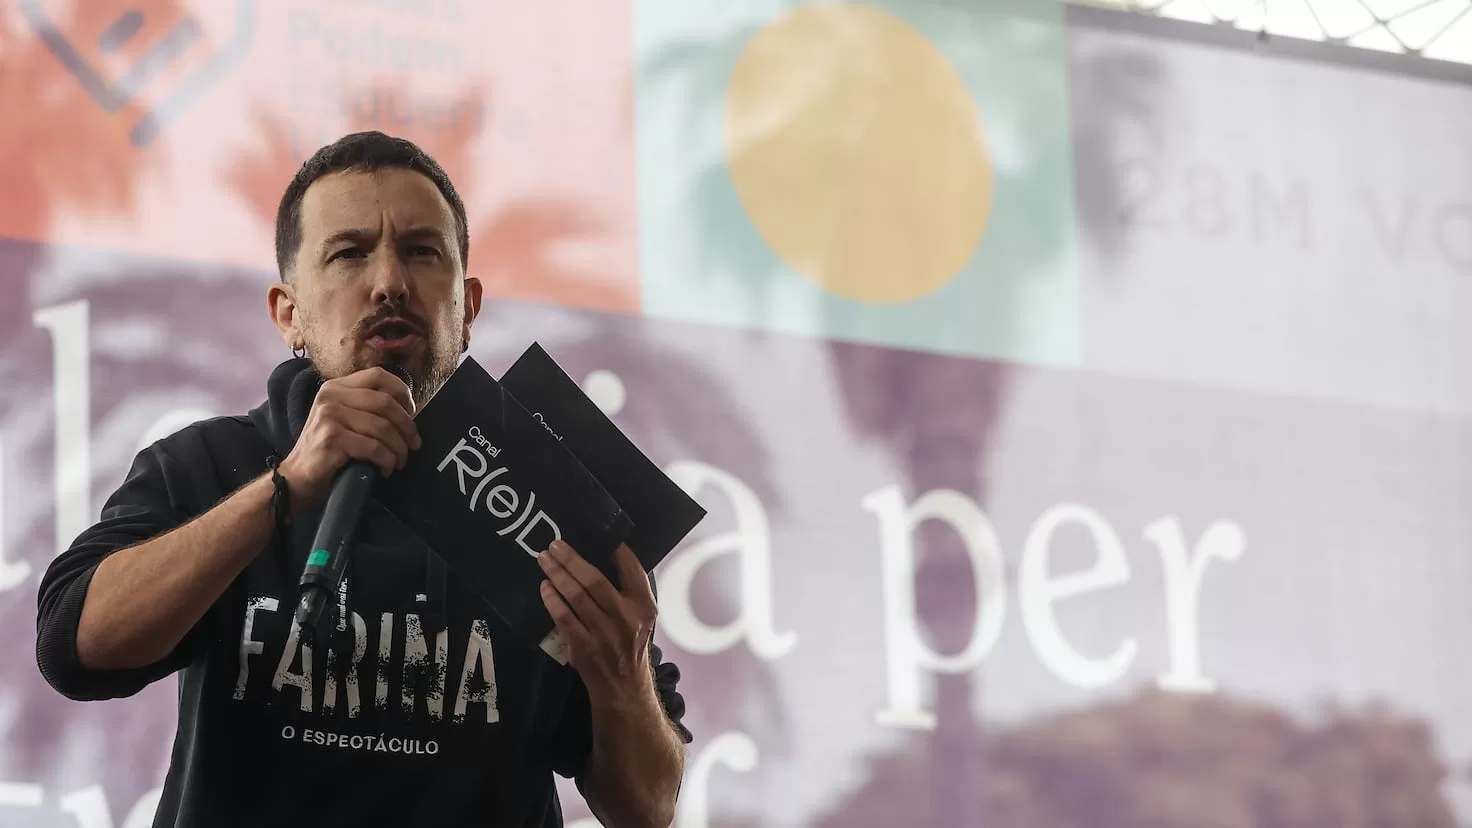 The letter from Pablo Iglesias' tavern in Lavapis: From Fidel Mojito to Don't call me Ternera
